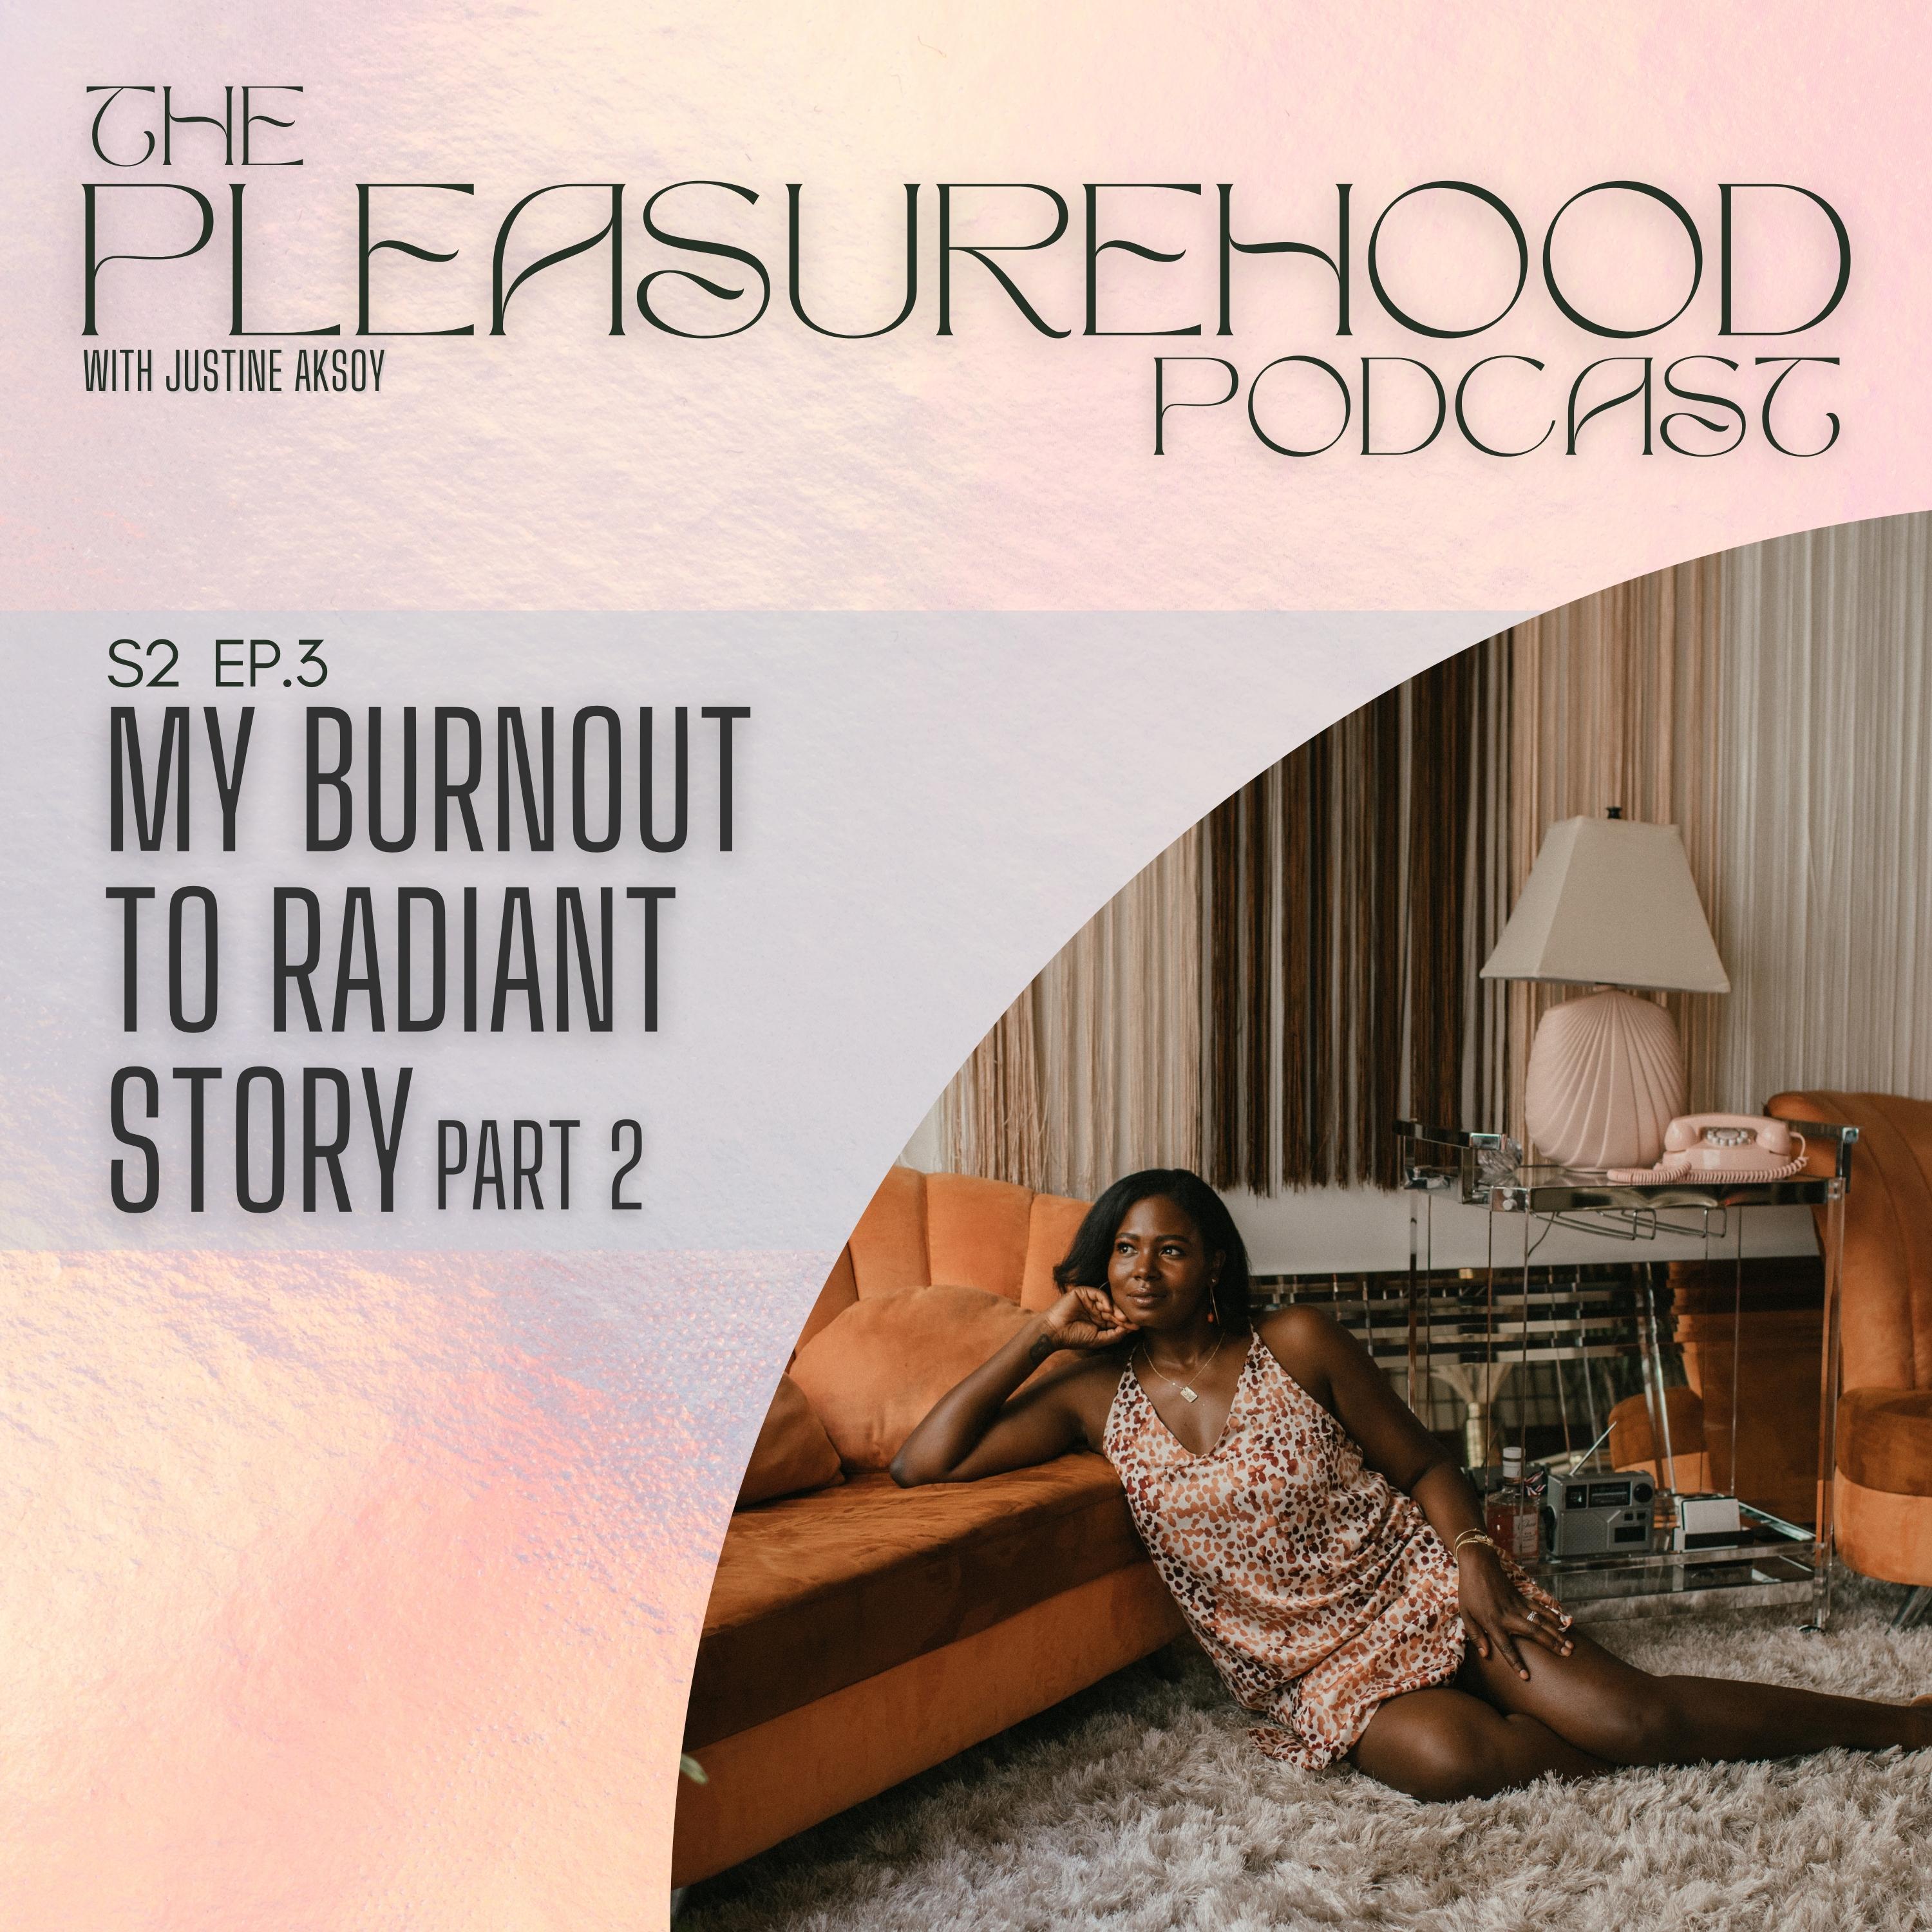 My Burnout to Radiant Story Part 2